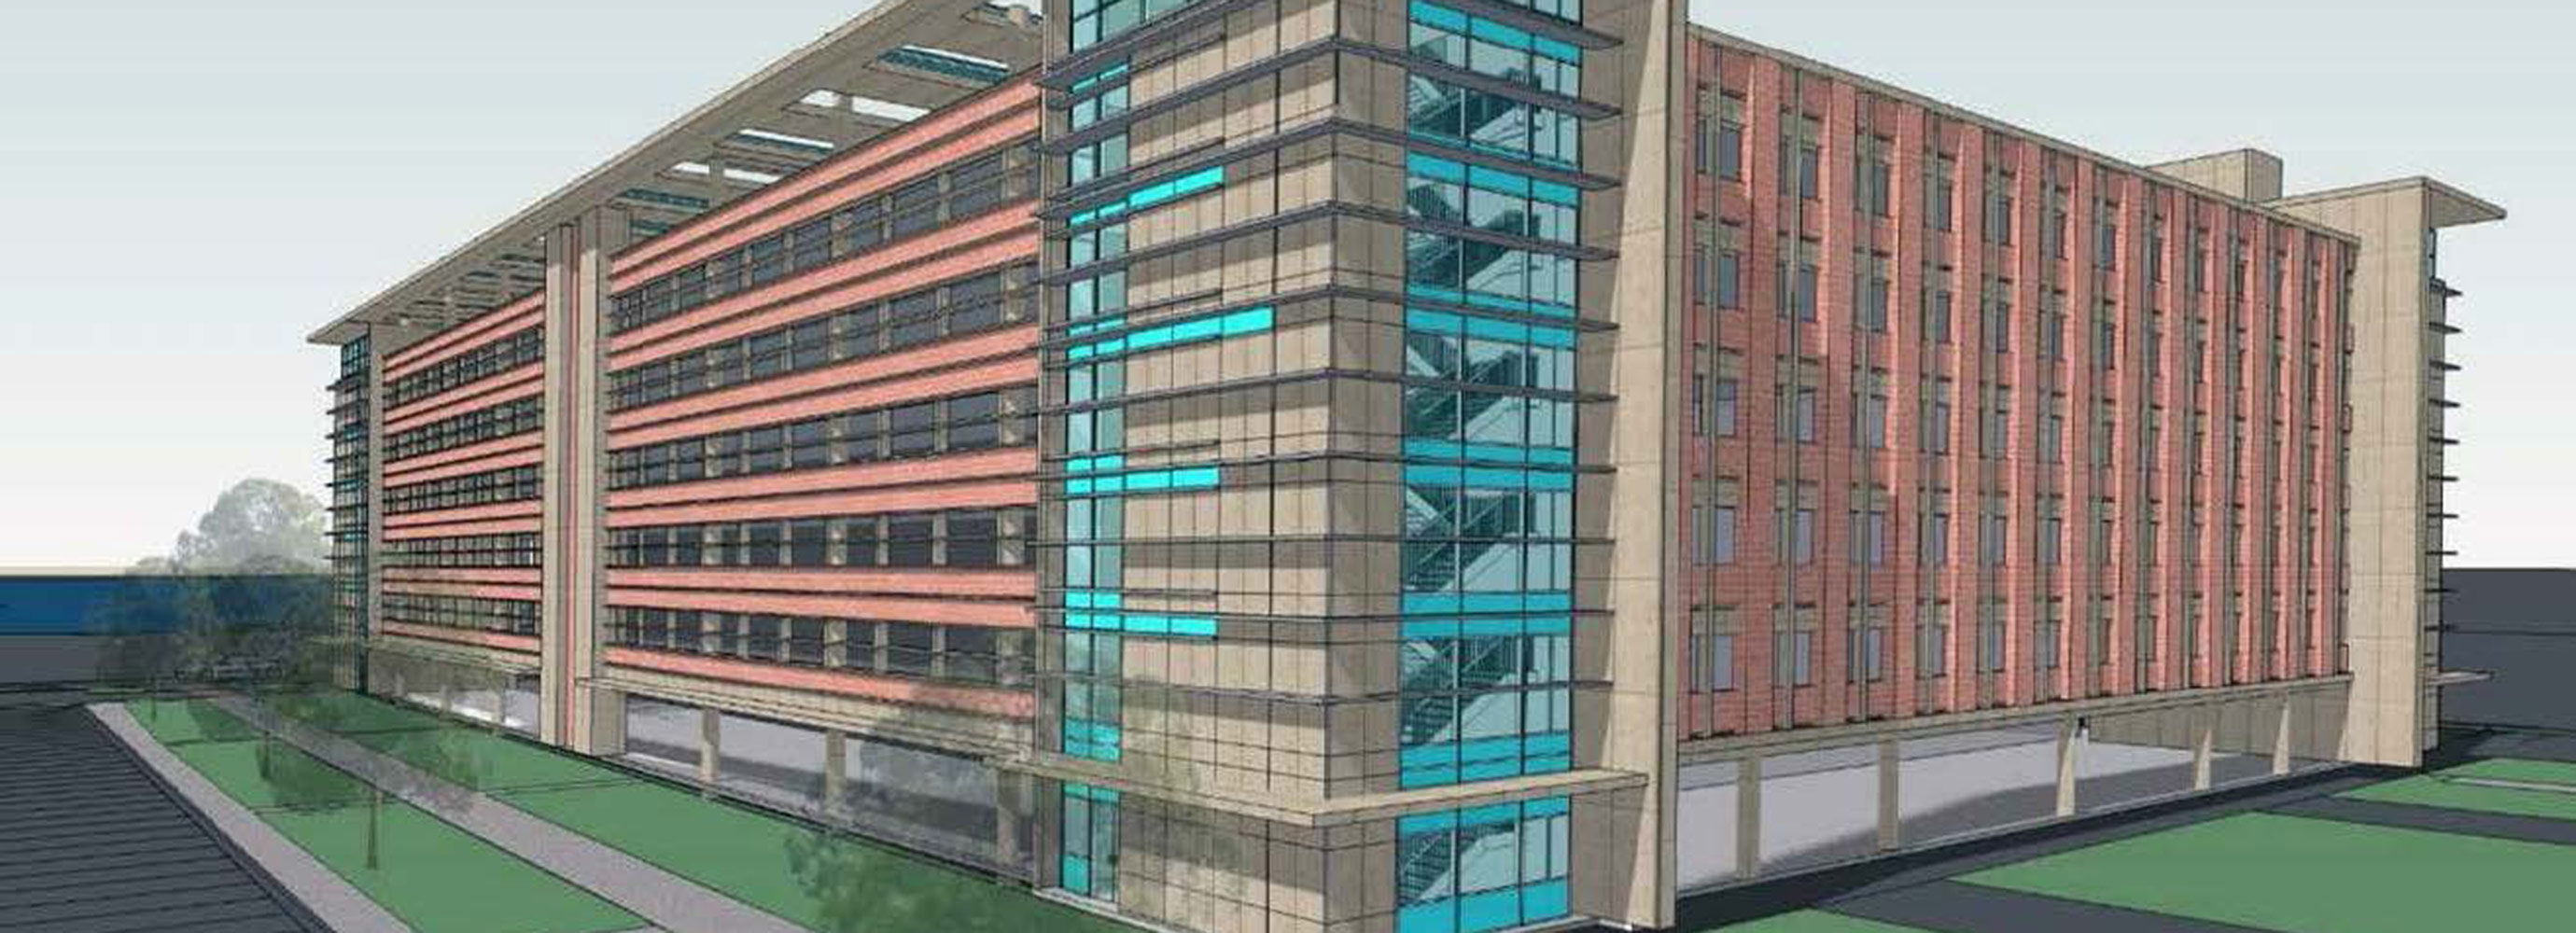 Project rendering of DOS Parking Garage